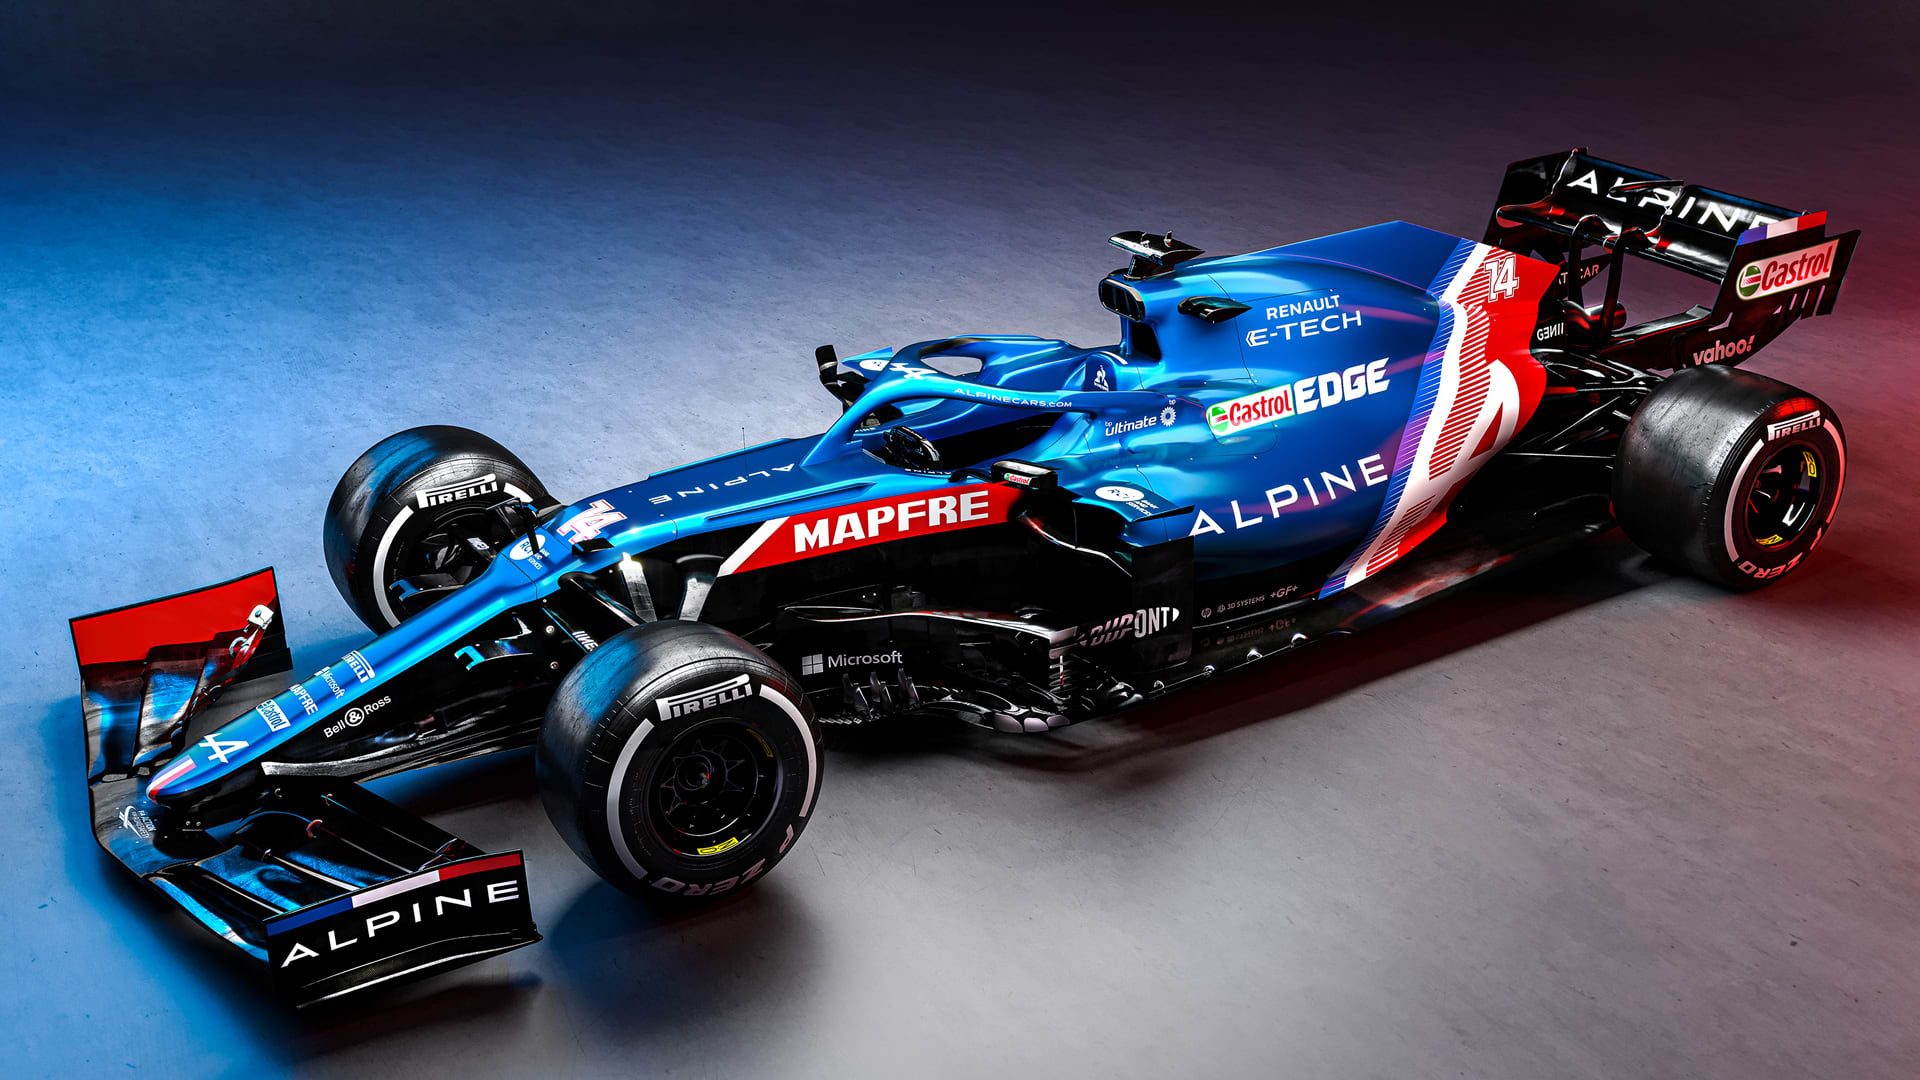 Alpine reveal striking blue, white and red livery at 2021 F1 season launch Formula 1®